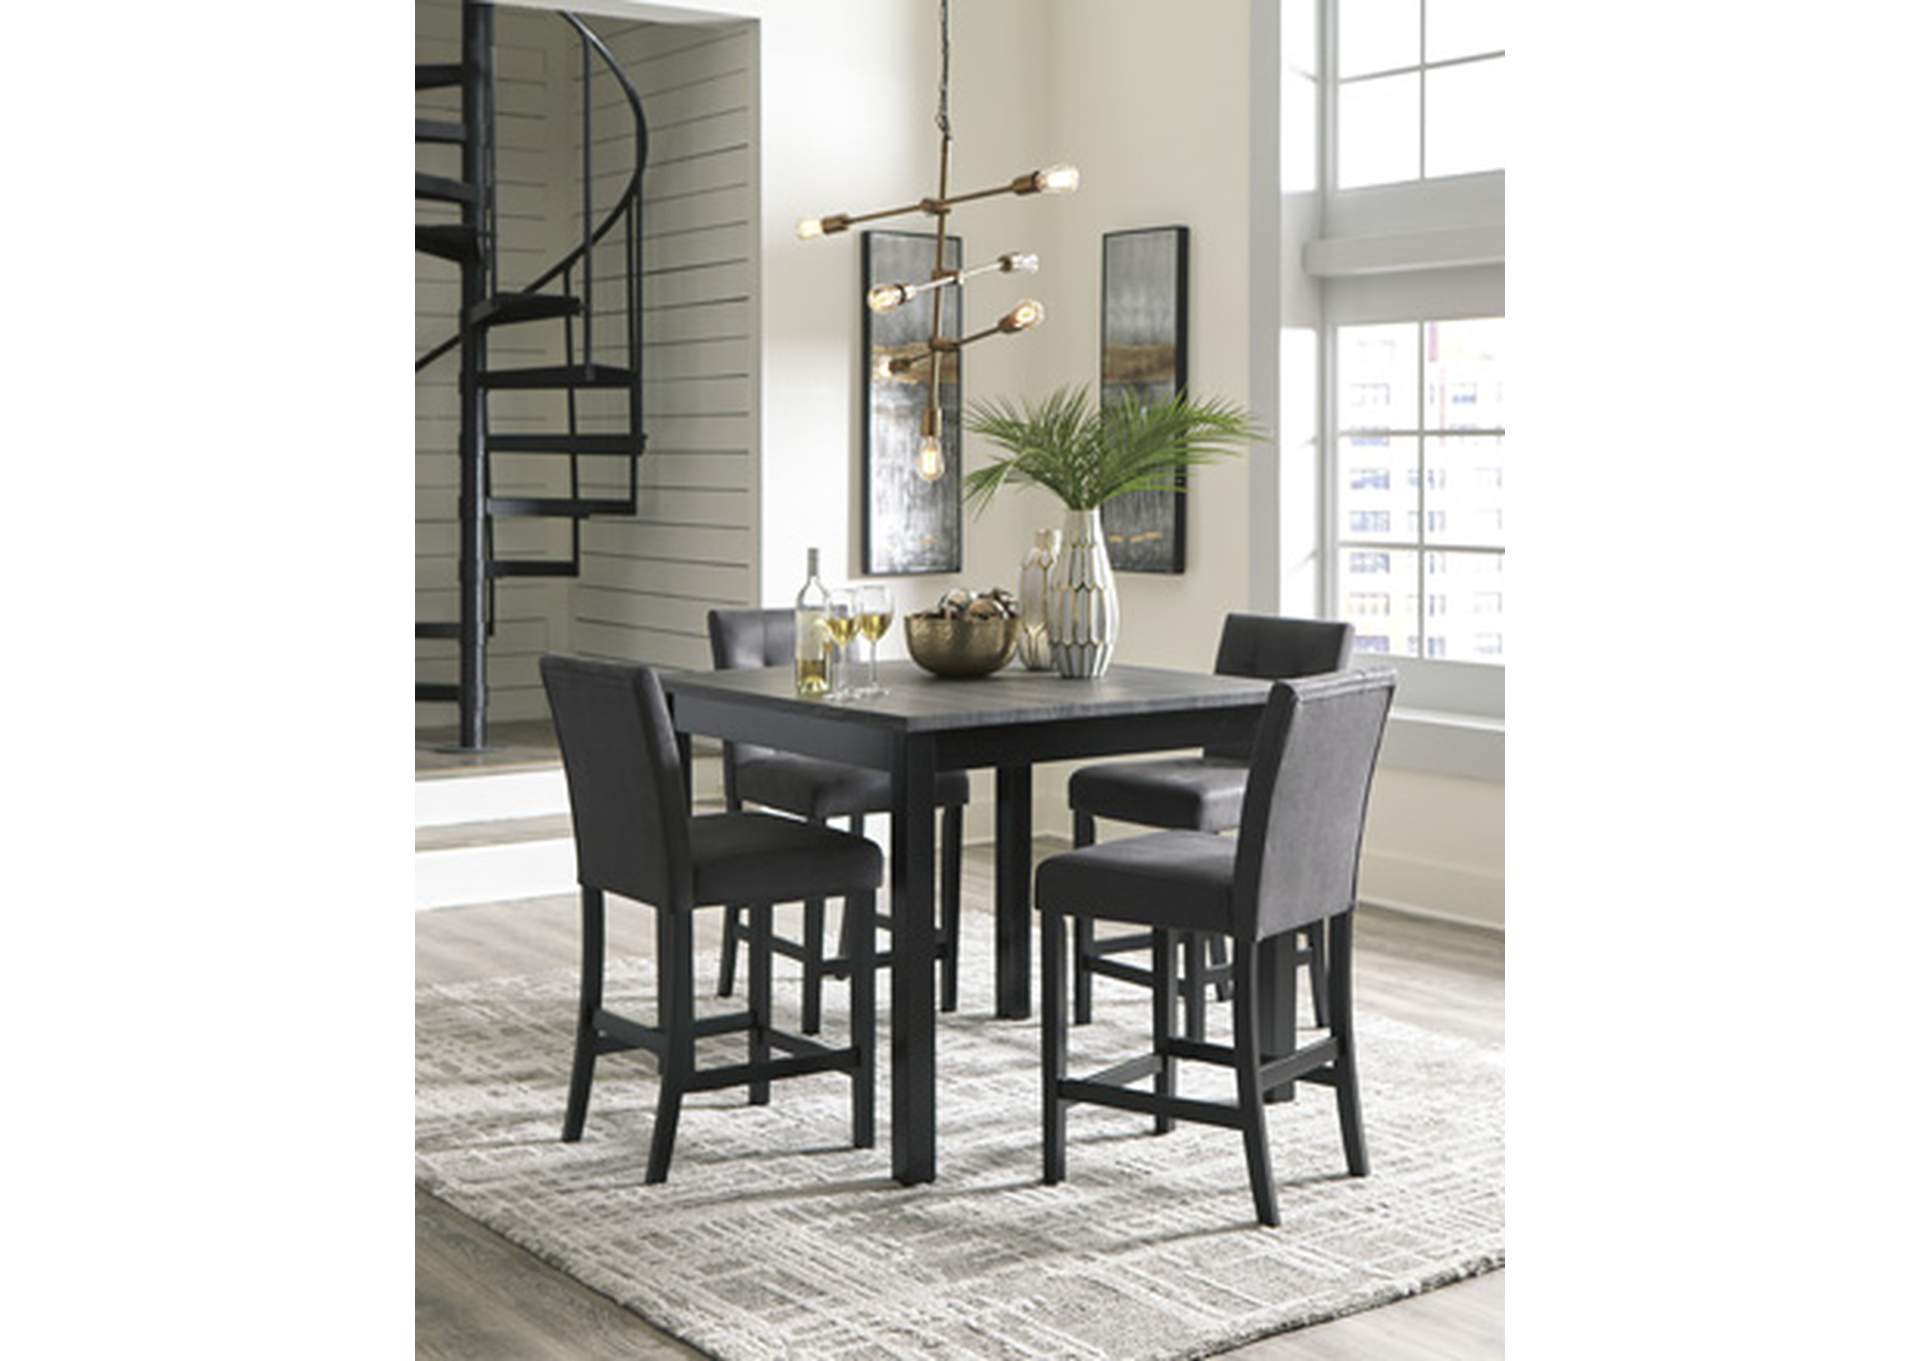 Garvine Counter Dining Table and Bar Stools (Set of 5)